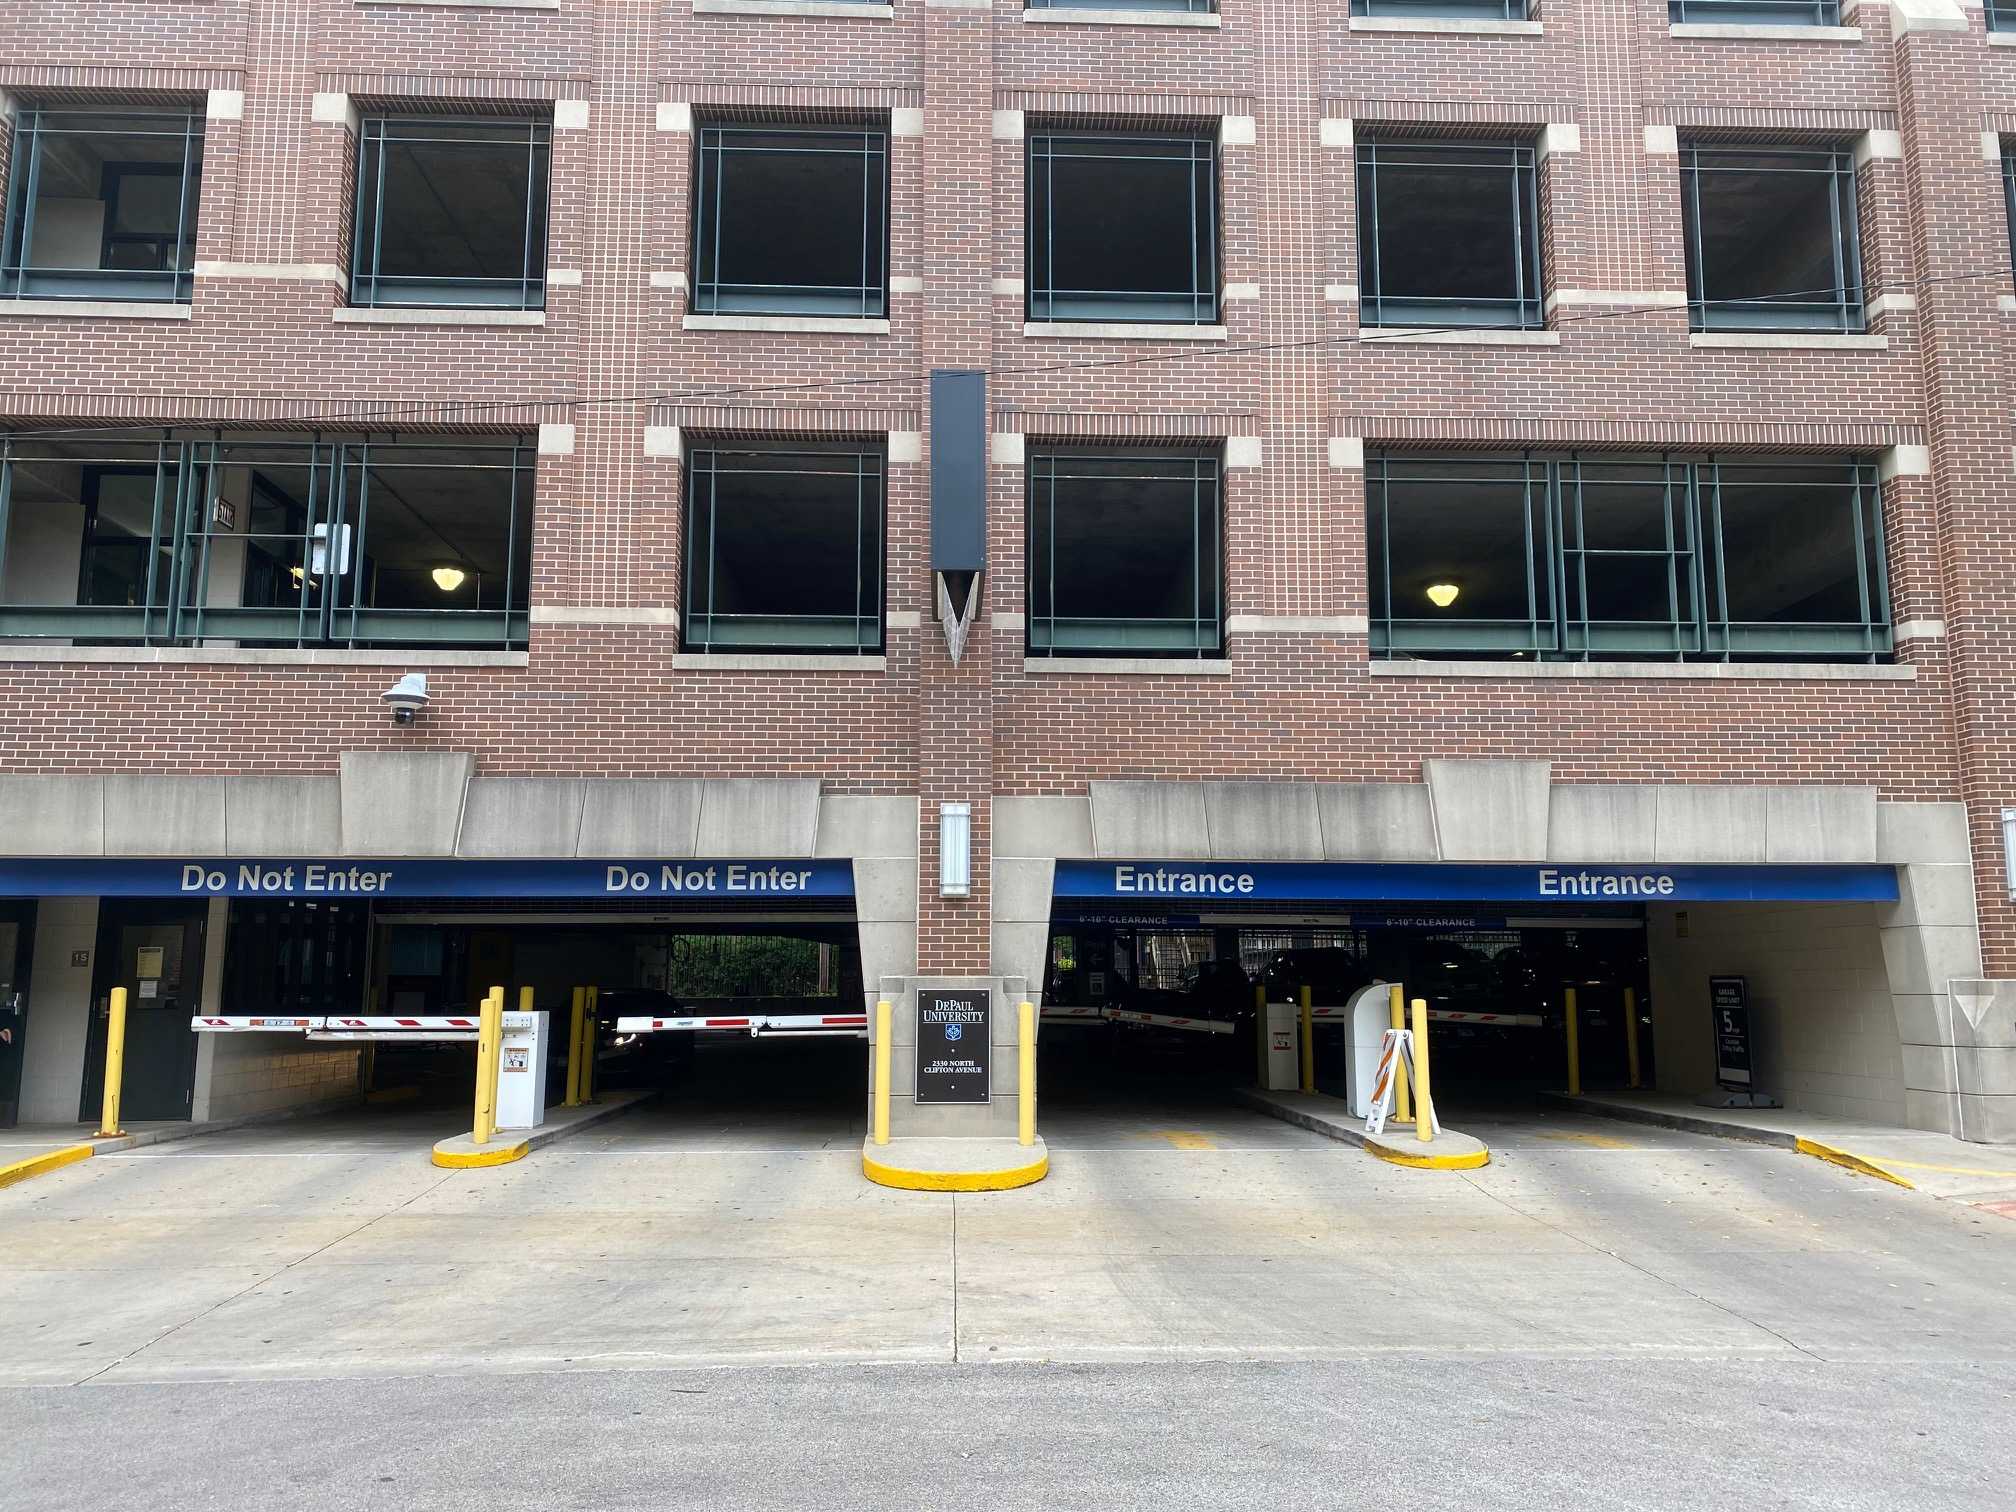 Clifton Garage Entrance and Exit